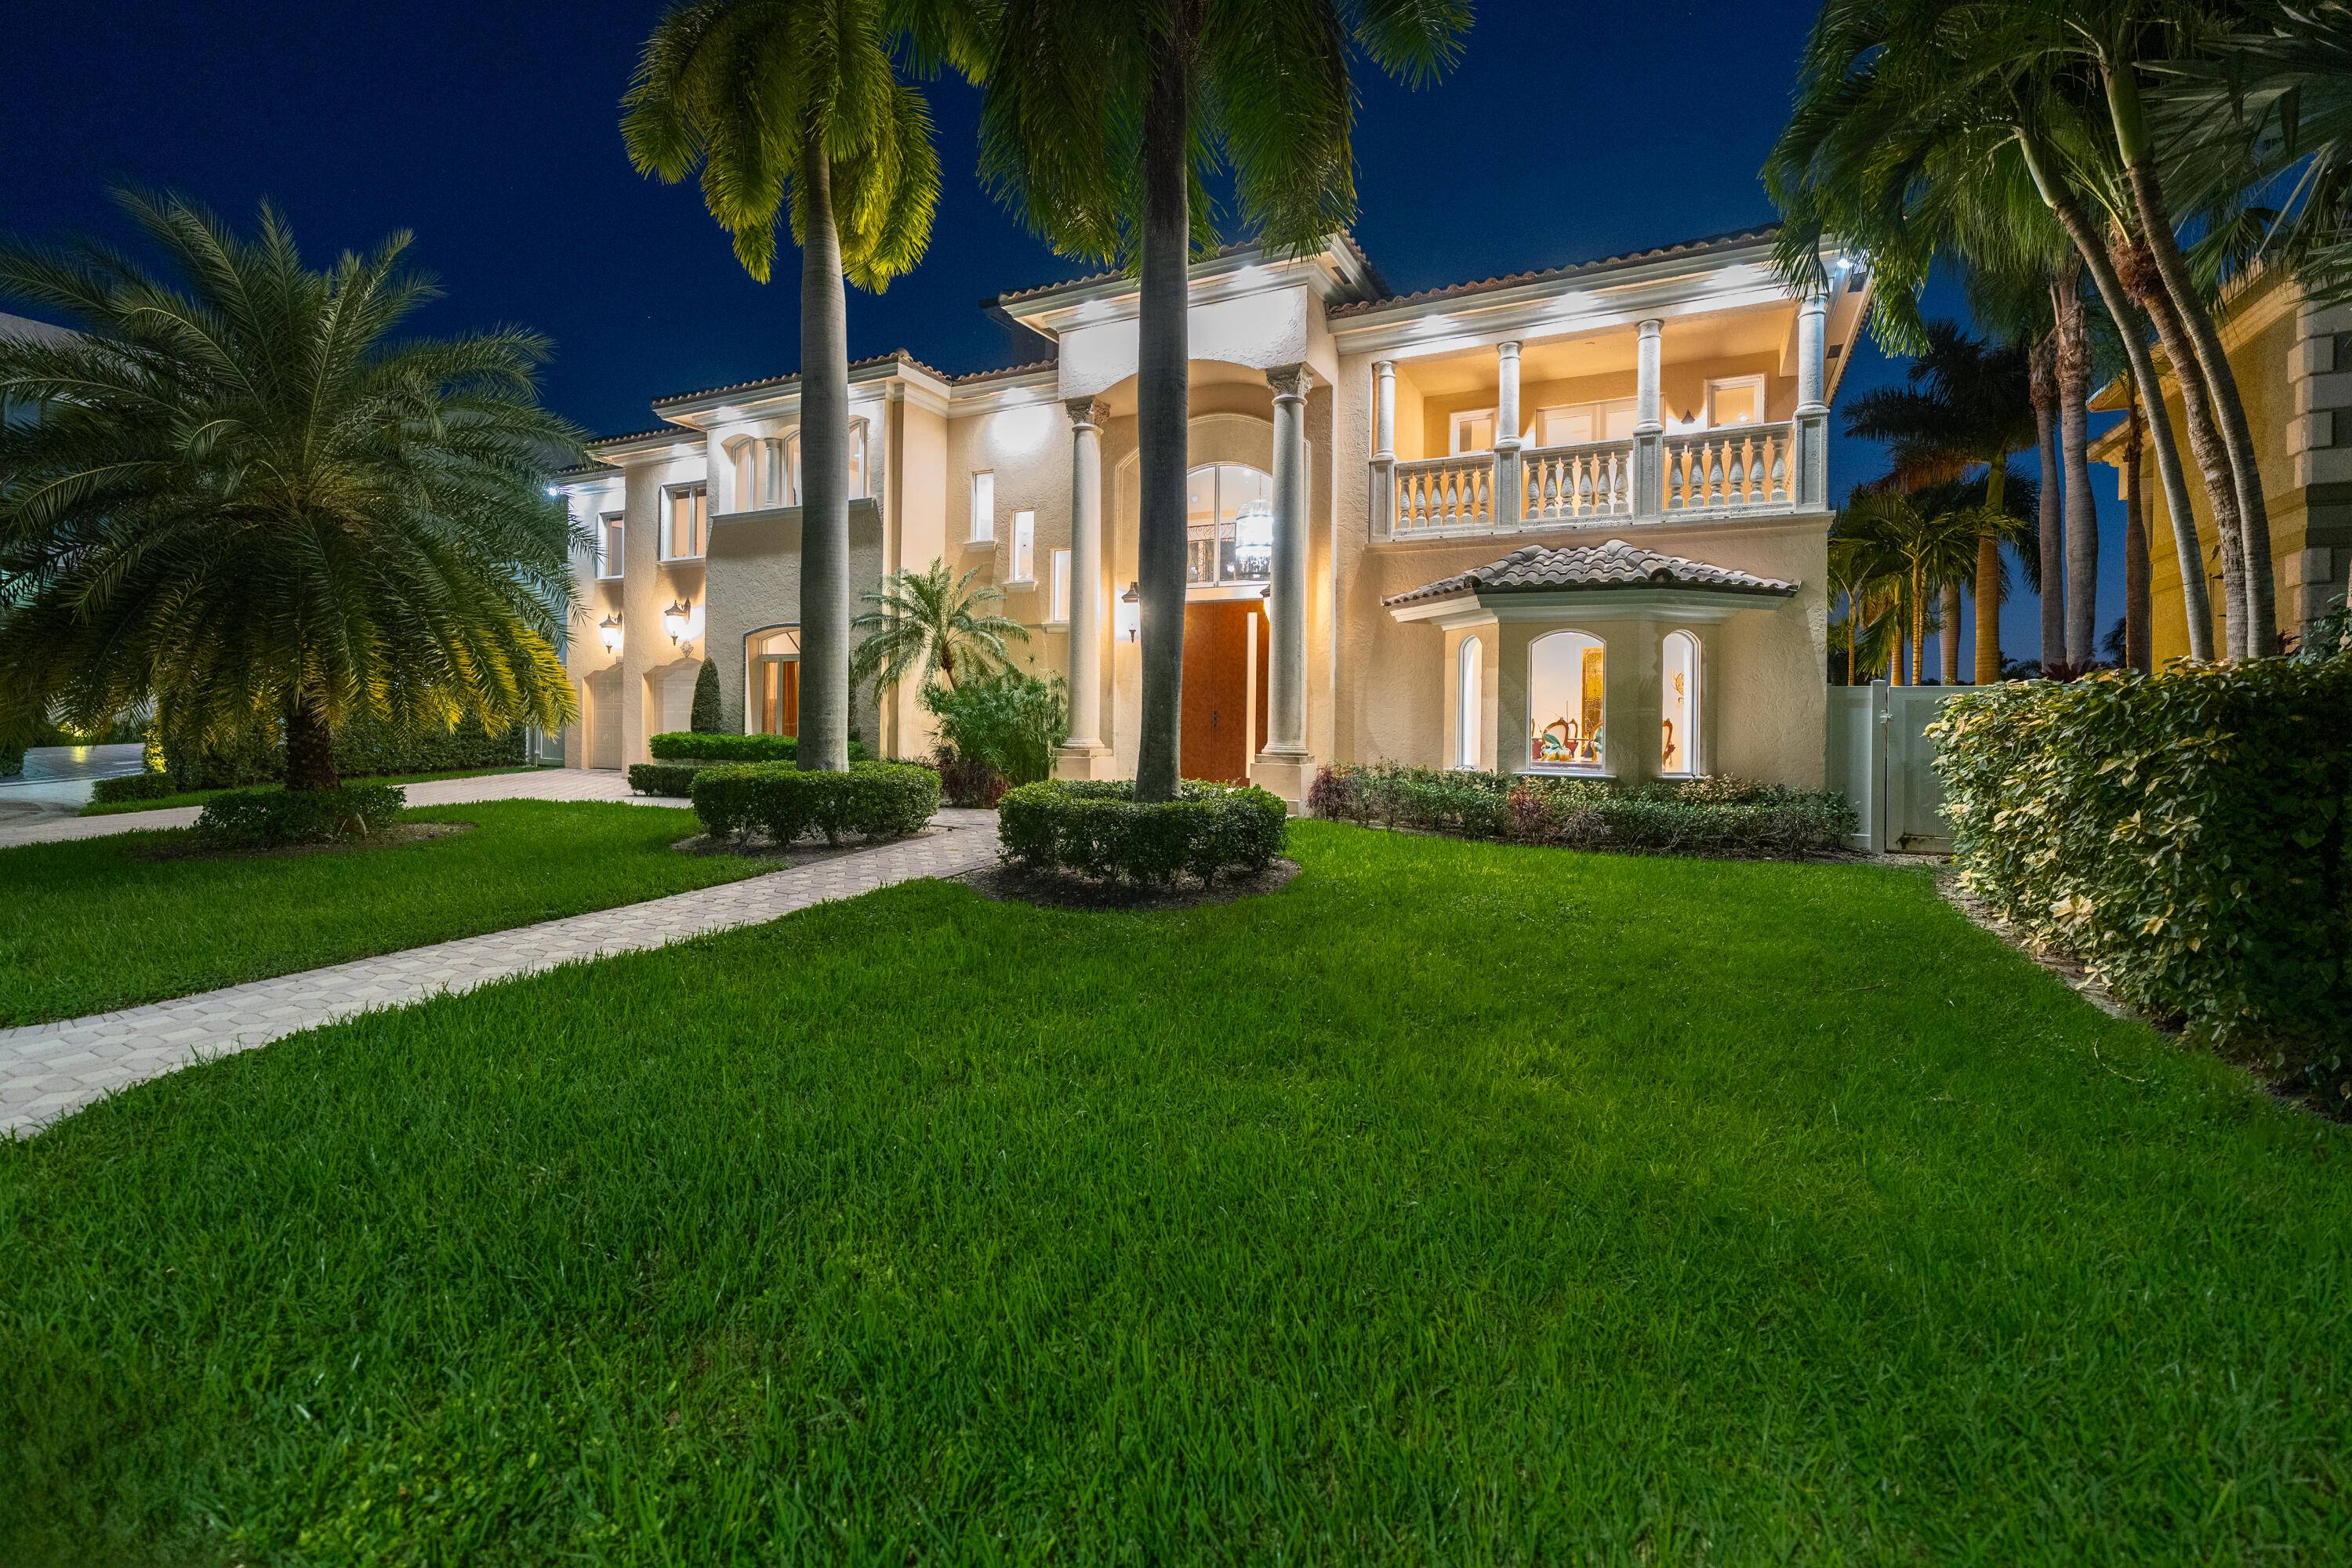 A remarkable waterfront estate one lot from intracoastal waterway, ideally situated and designed to embrace the ultimate South Florida lifestyle.